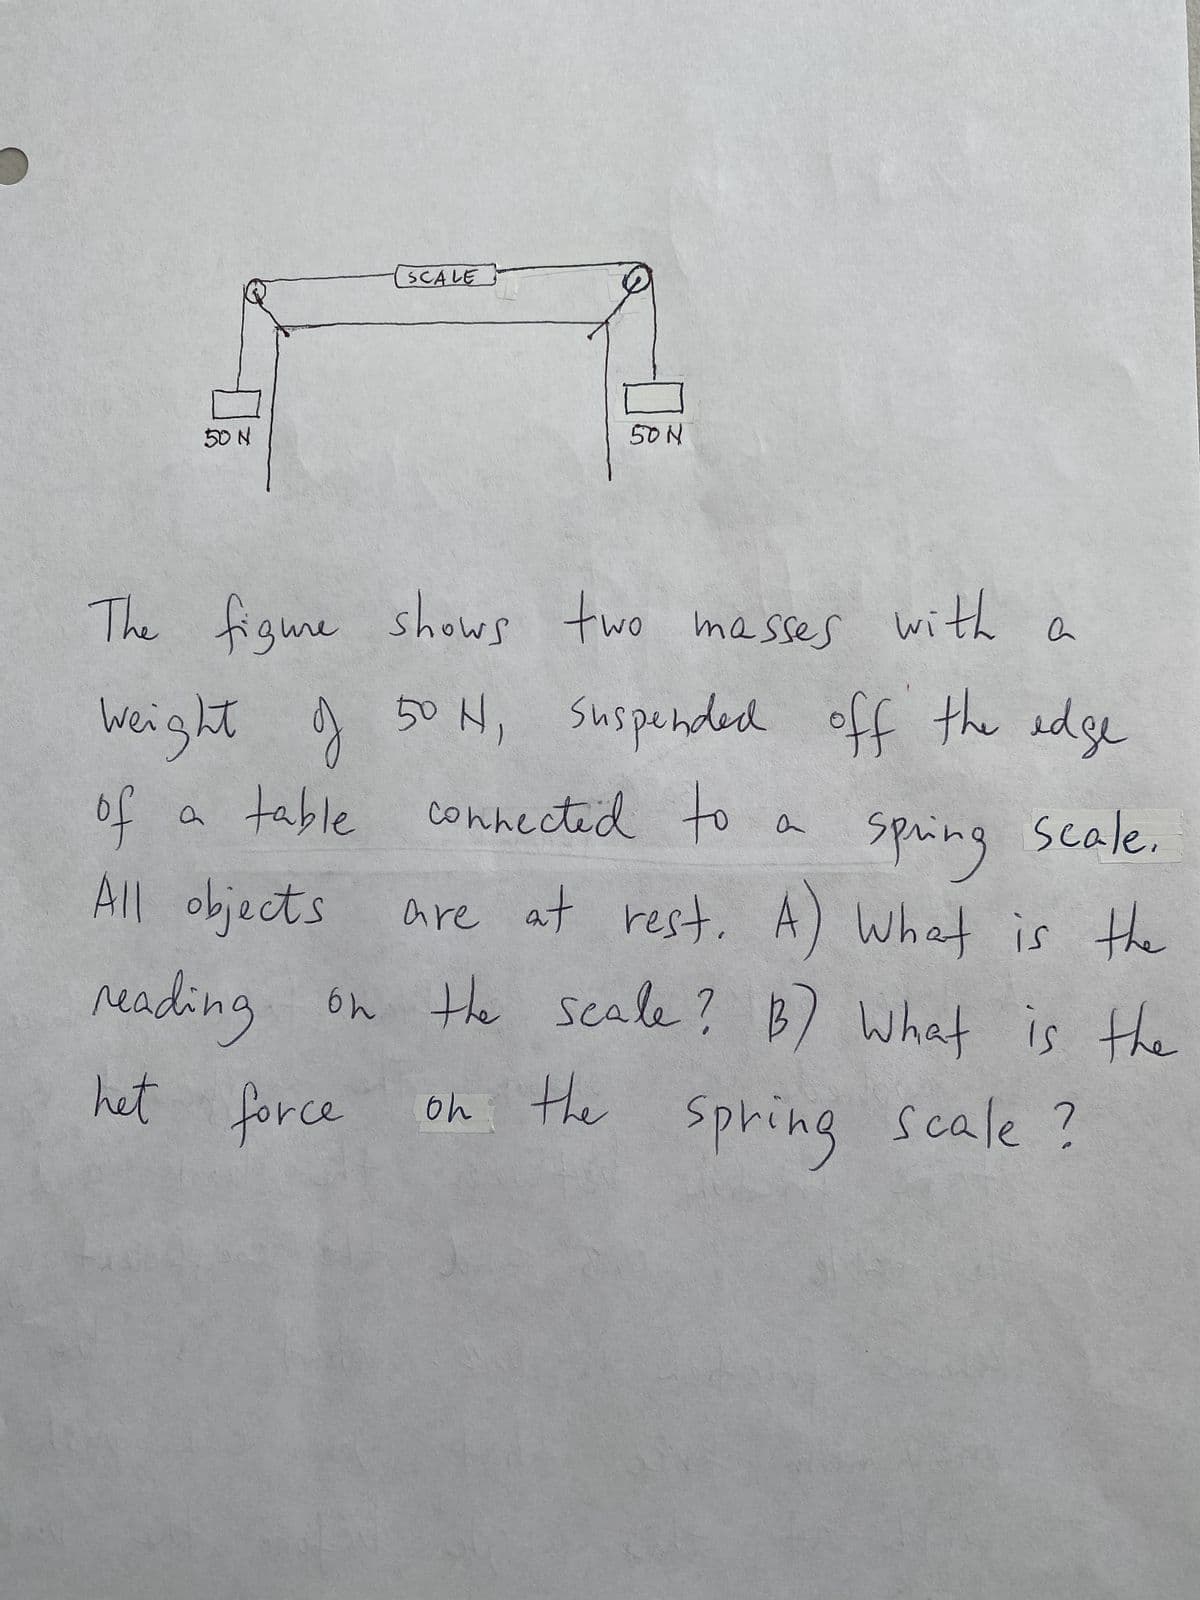 50 N
SCALE
50 N
with a
The figure shows two masses
weight of 50 H, Suspended off the edge
of
a table
onnected to
Spring Scale.
All objects
are at rest.
What is the
reading on the scale? B) What is the
het force
on the spring scale?
a